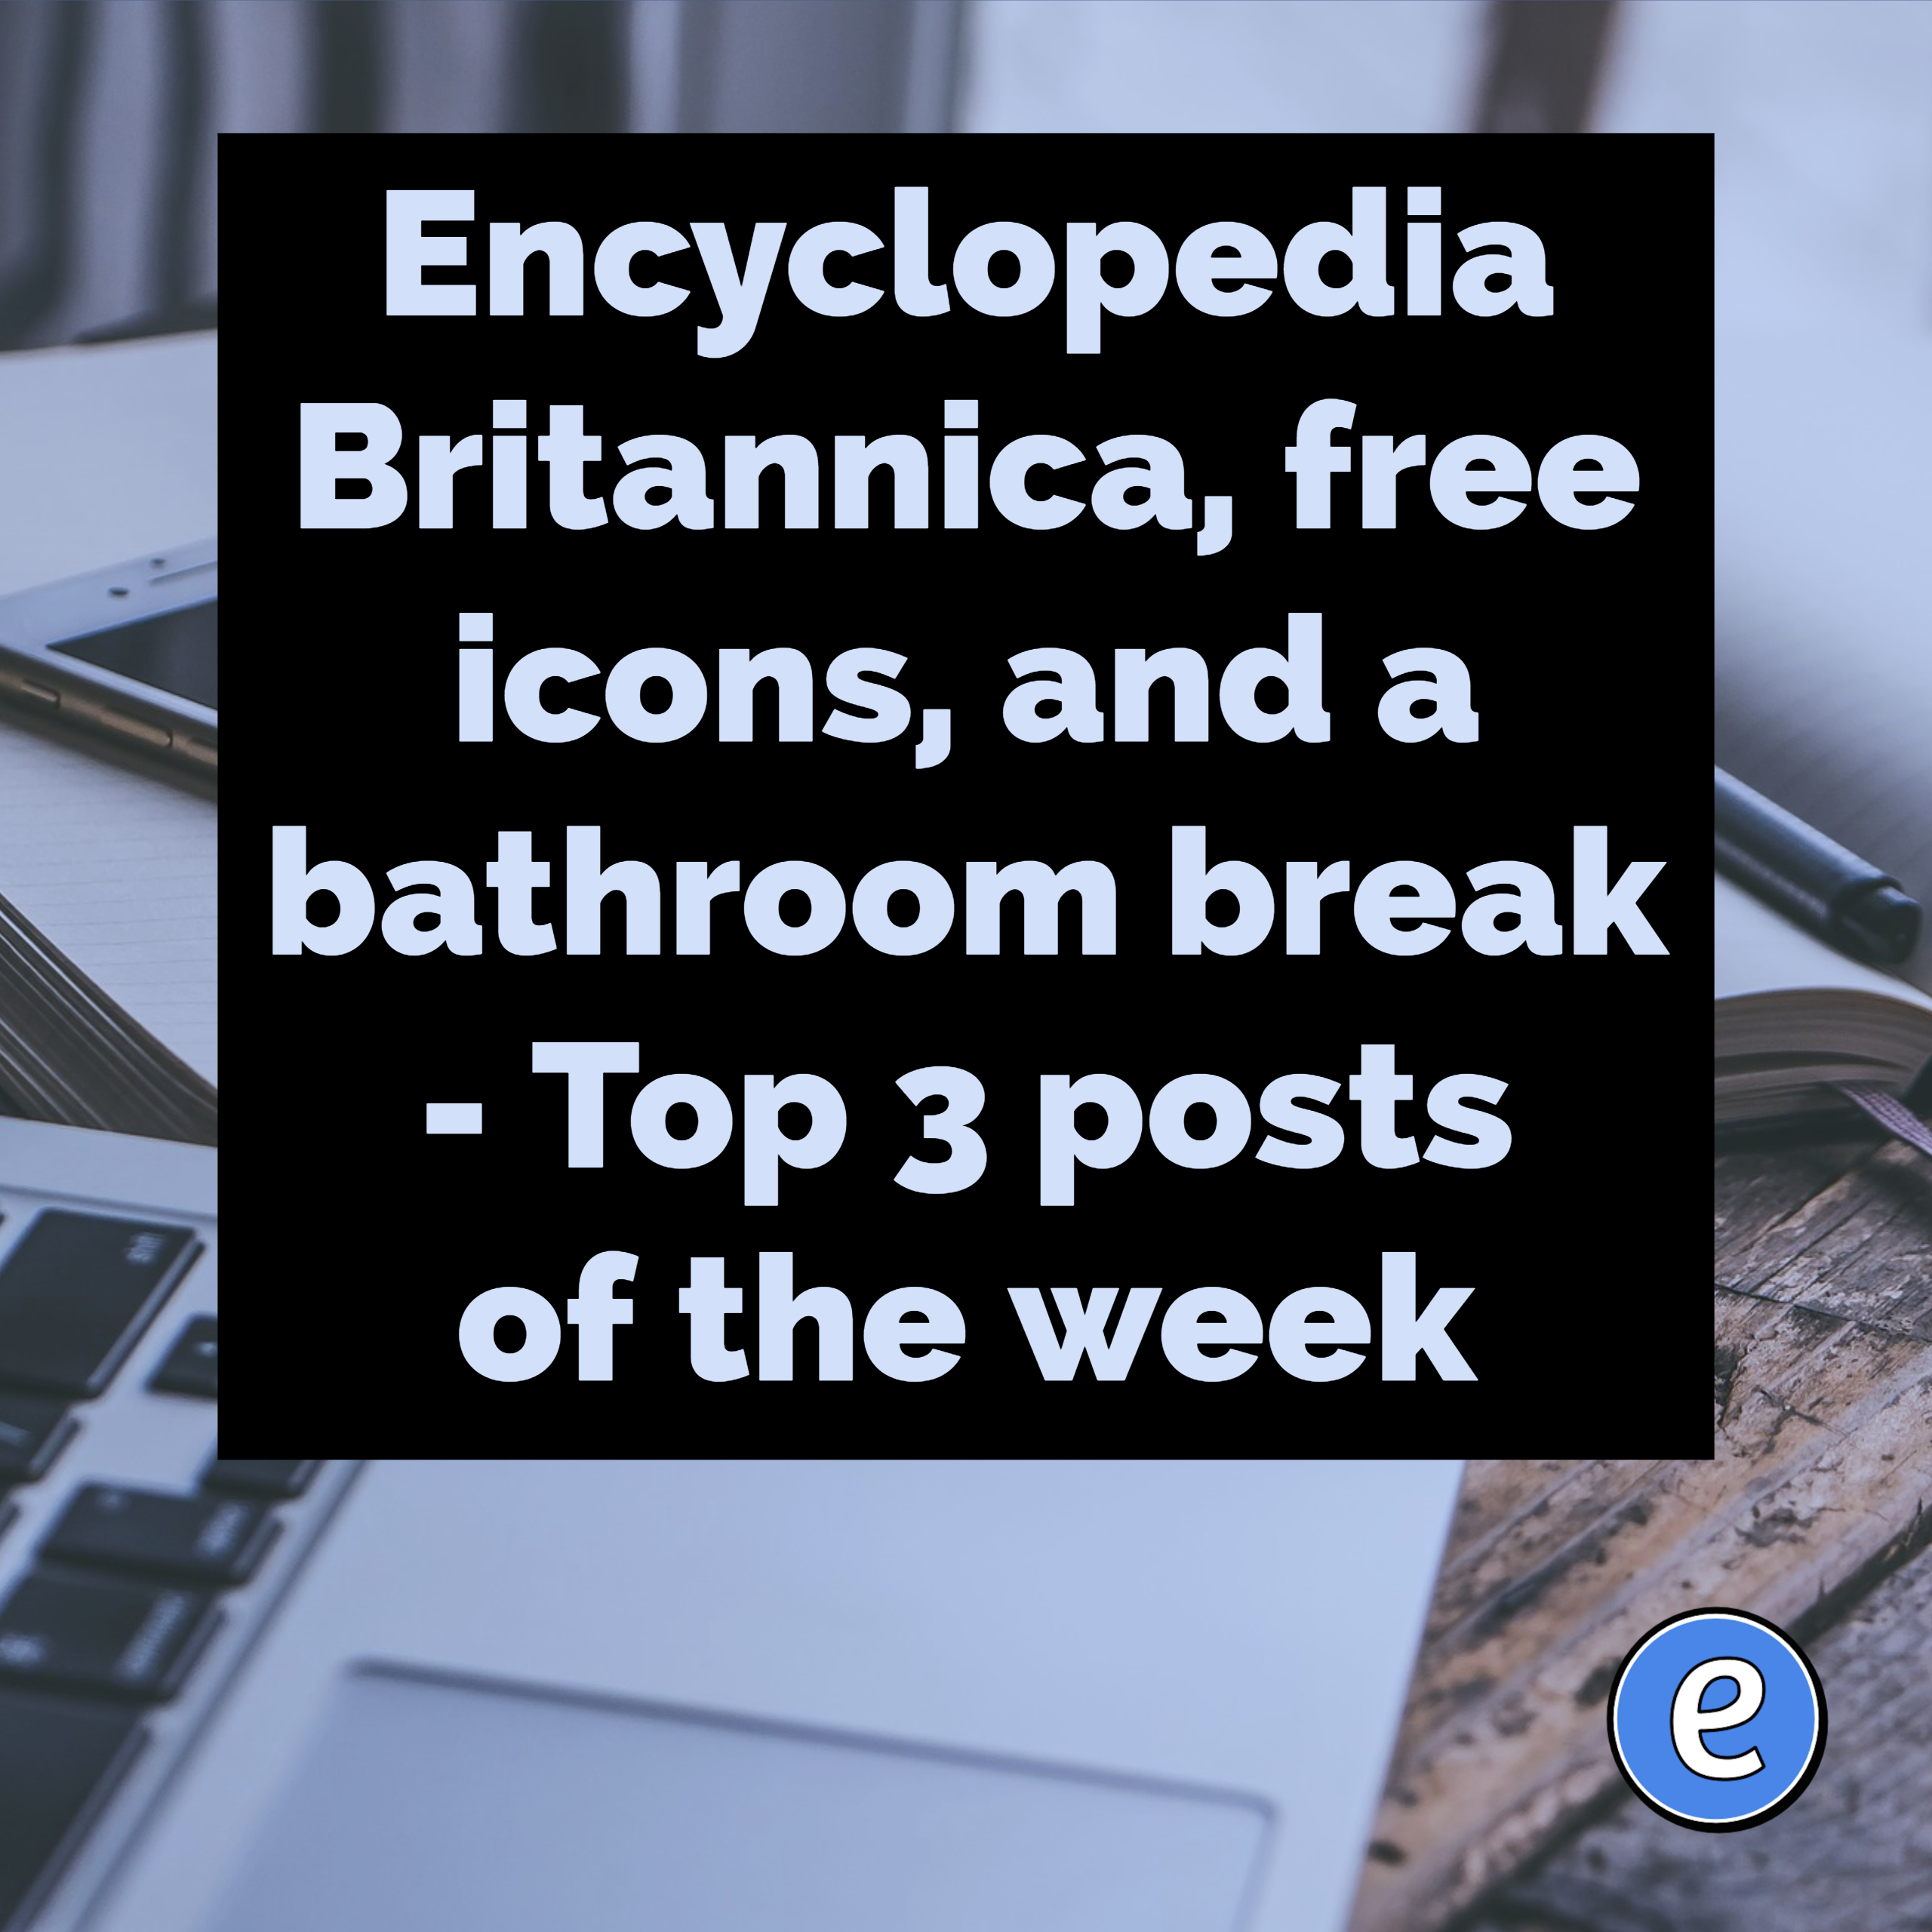 Encyclopedia Britannica, free icons, and a bathroom break – Top 3 posts of the week